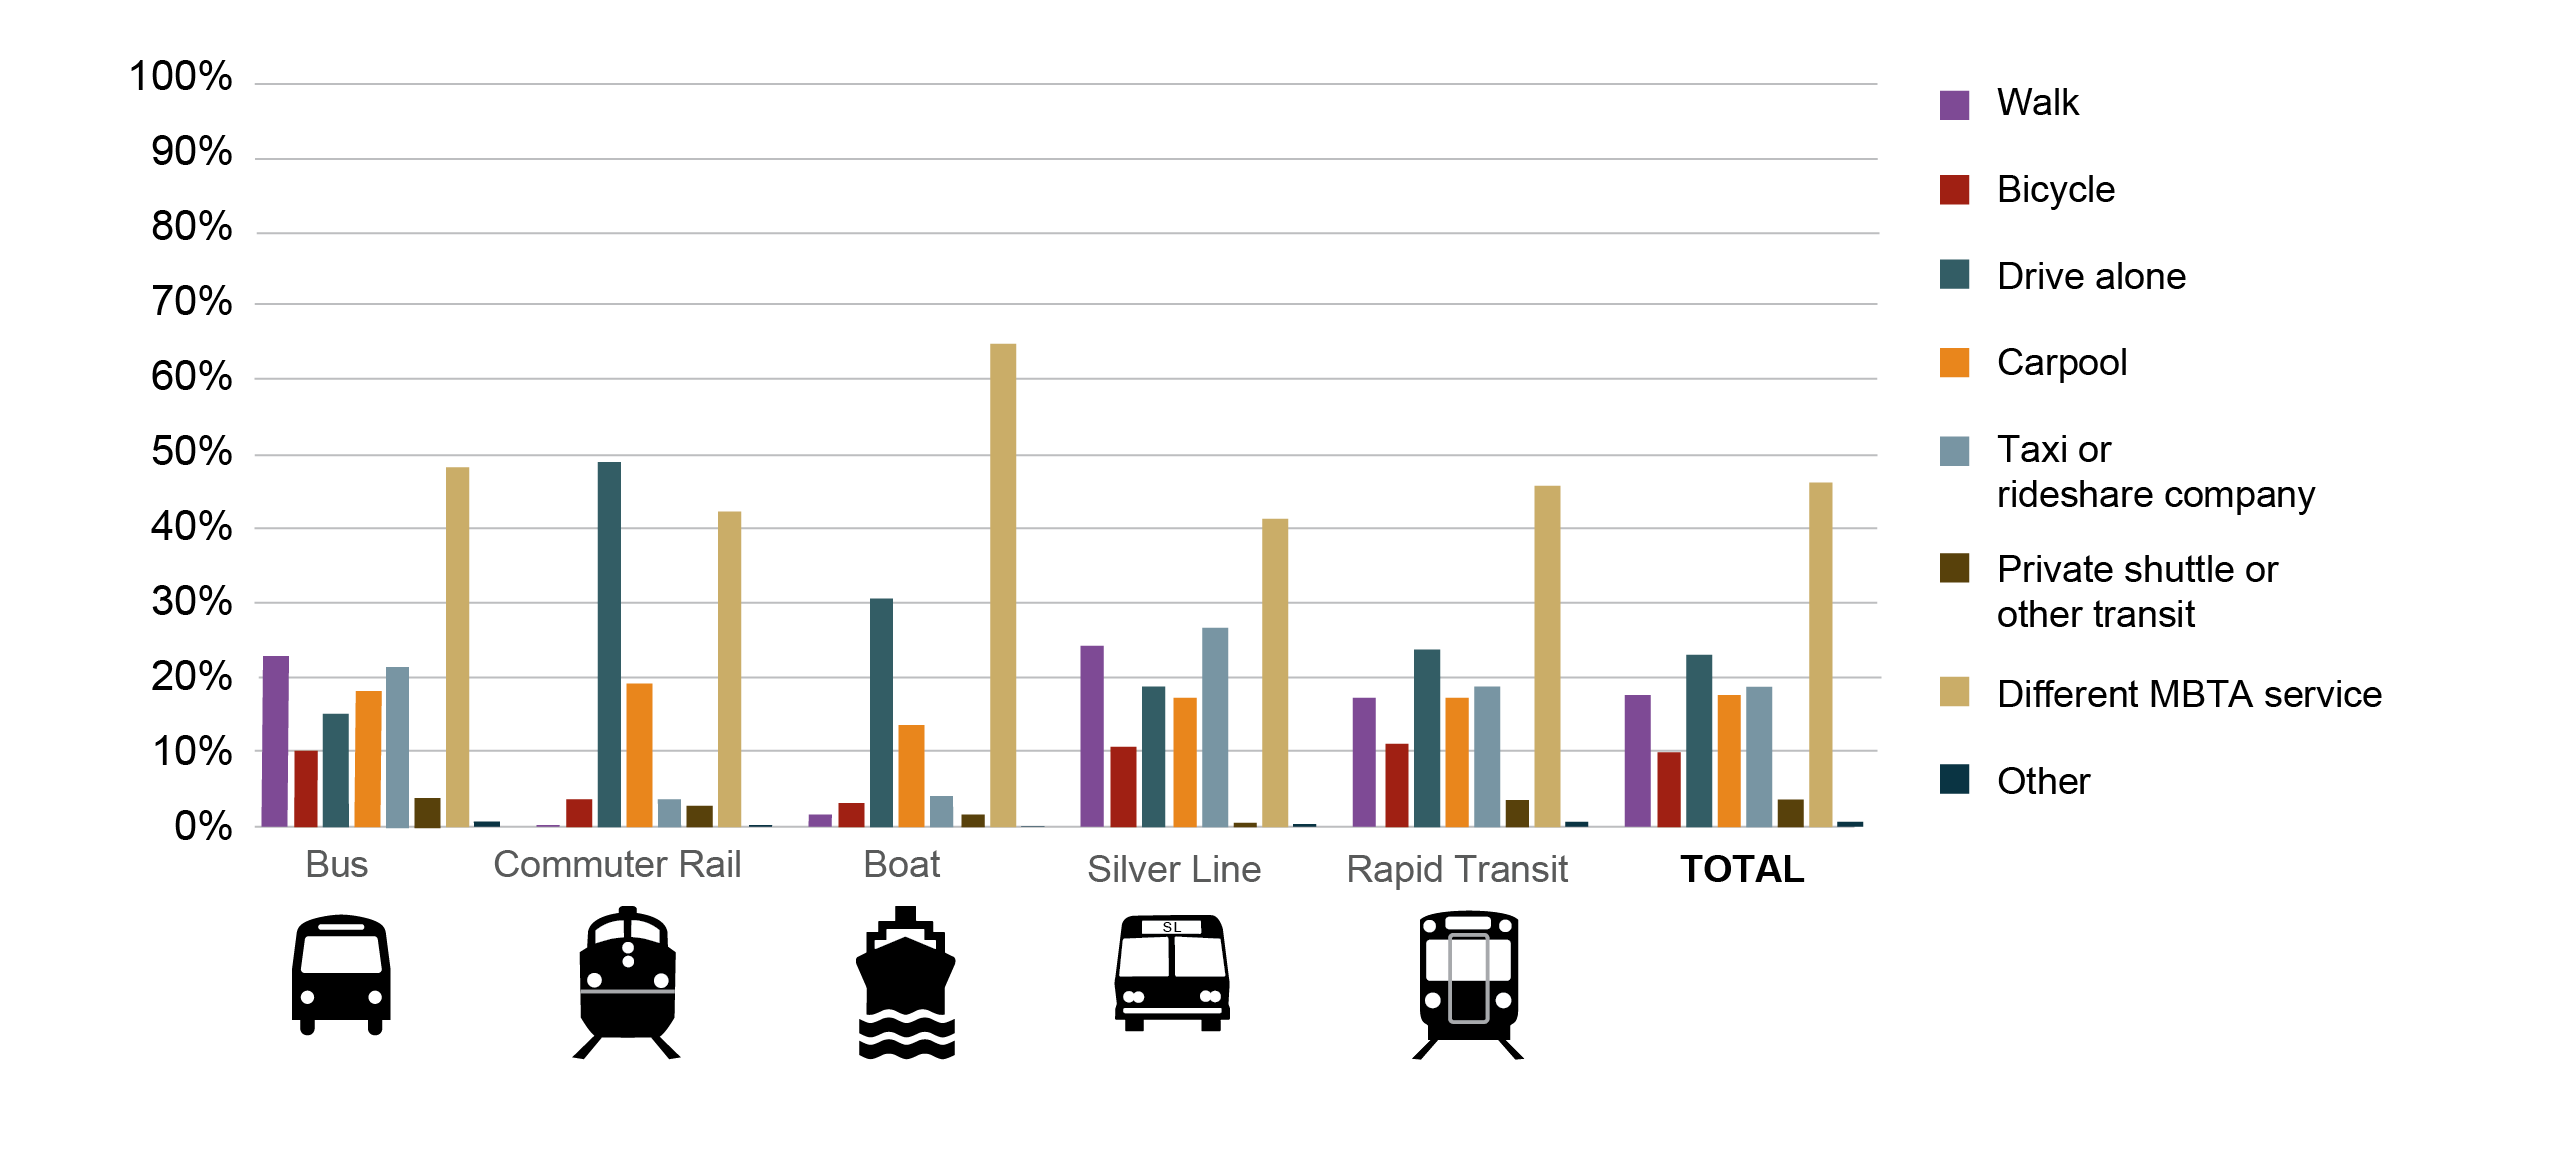 Figure 4 is a series of bar graphs showing the percentage distributions of alternate means of transportation reported by riders on each MBTA service mode in the 2015-17 survey. 